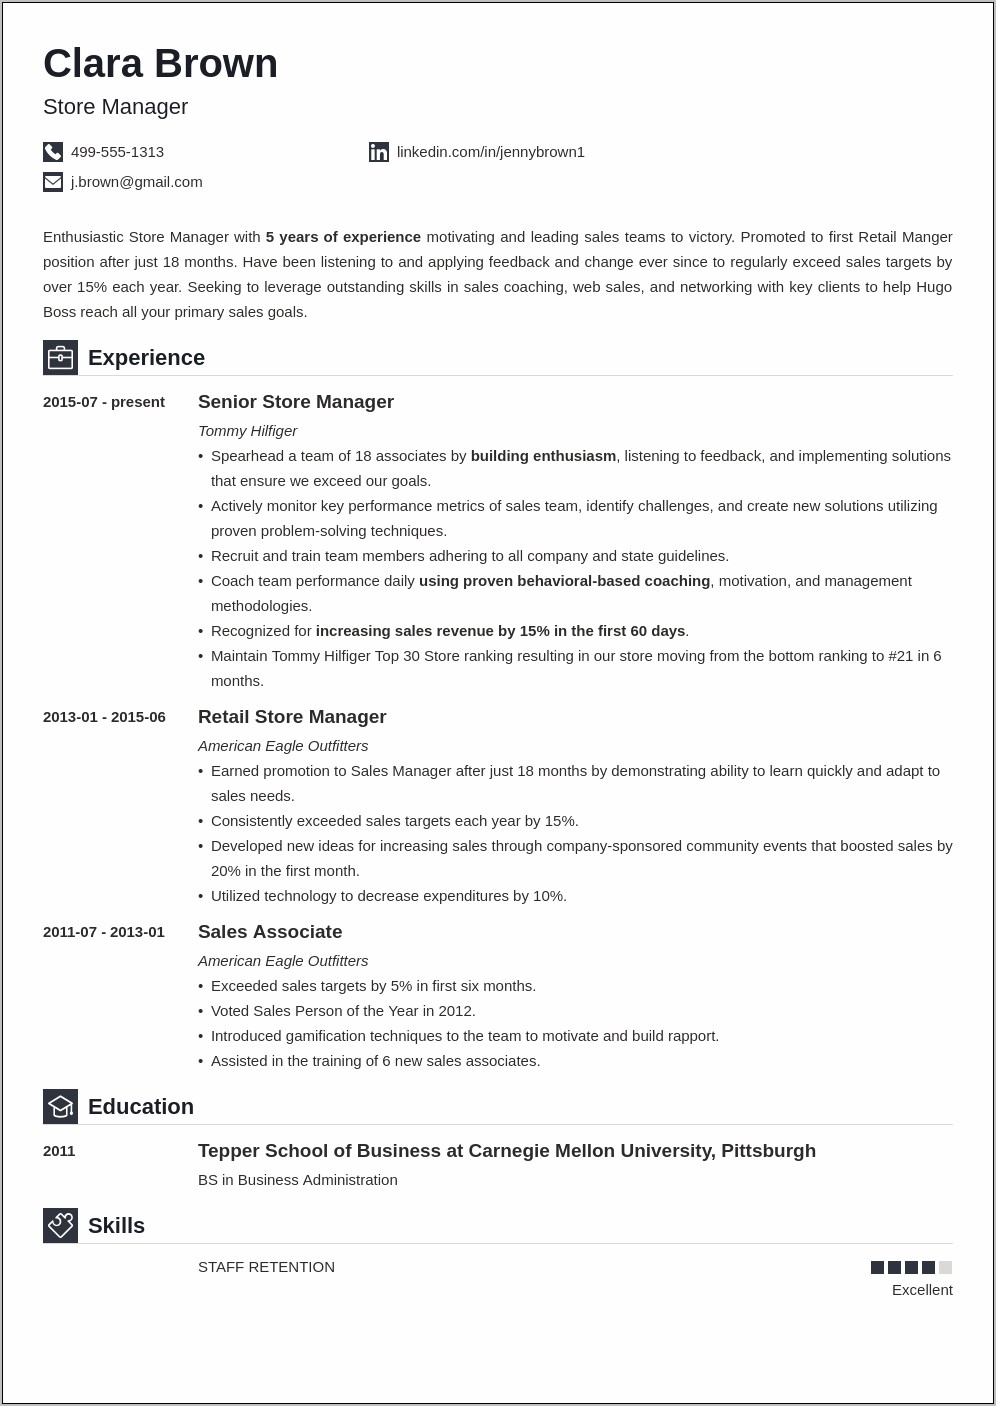 Resumes For Retail Assistant Managers